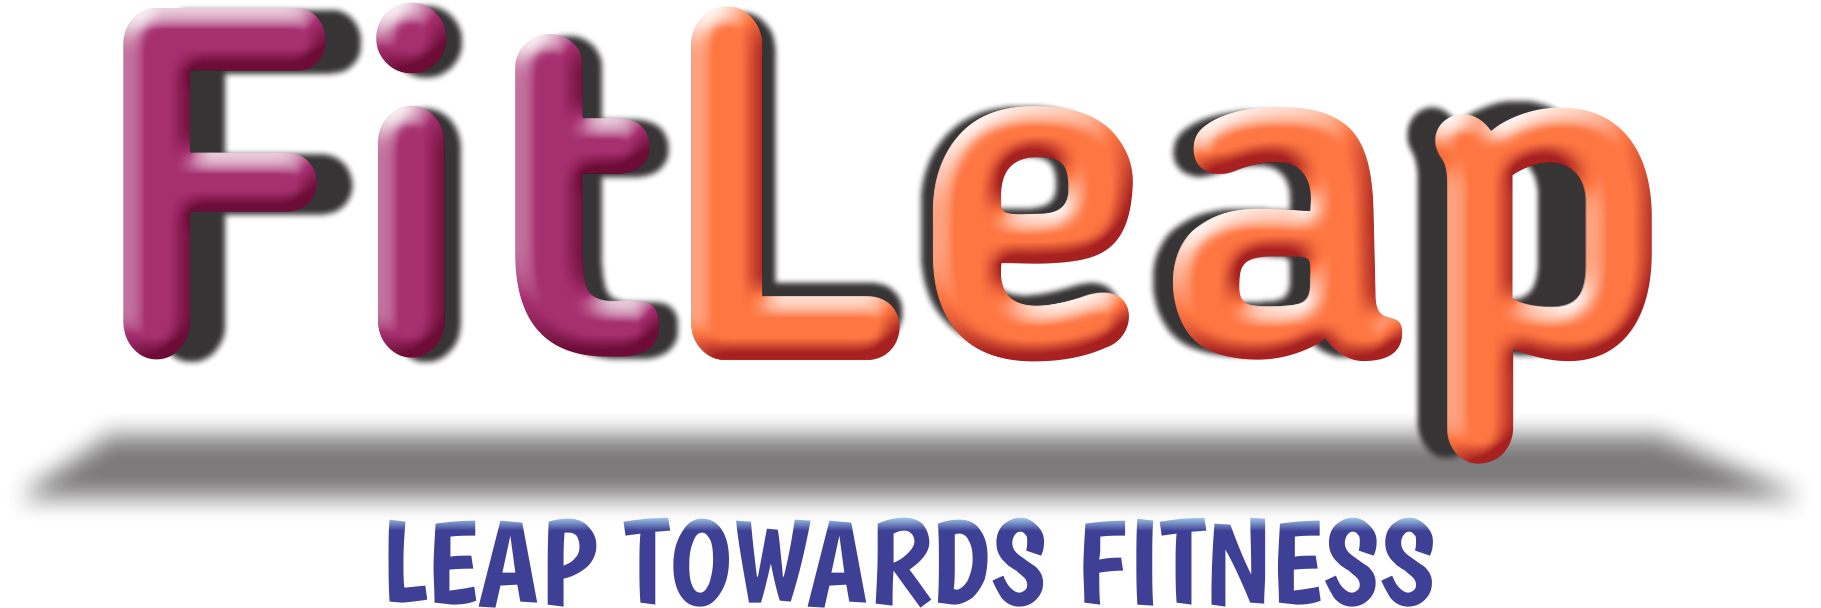 FitLeap